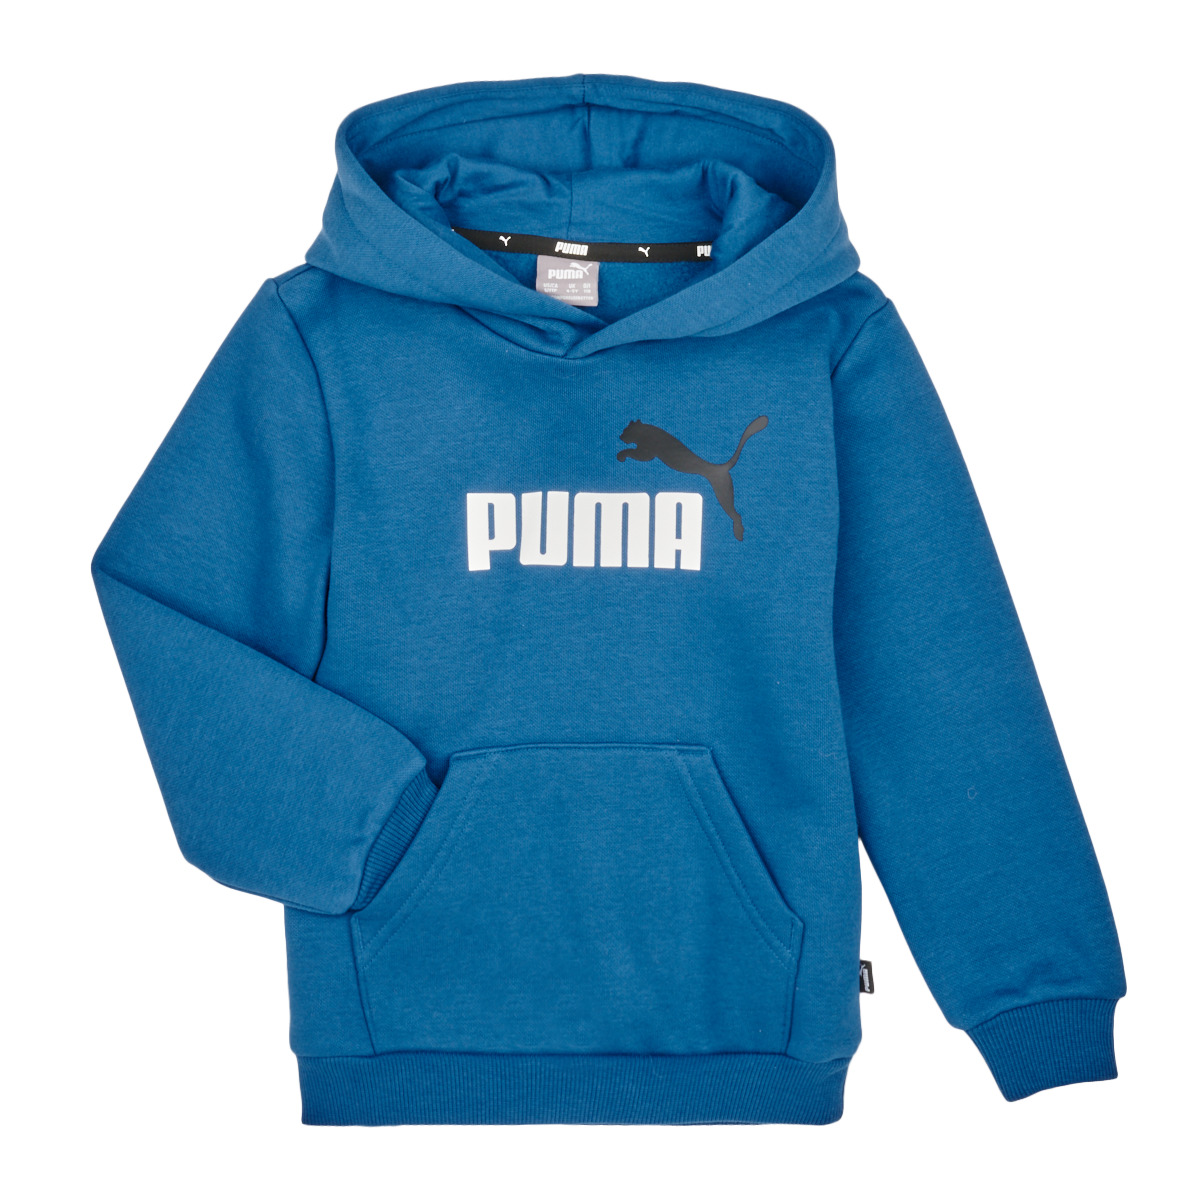 ESS 2 - delivery ! BIG Puma Europe 26,40 Fast Spartoo - € sweaters | Child COL LOGO Blue Clothing HOODIE